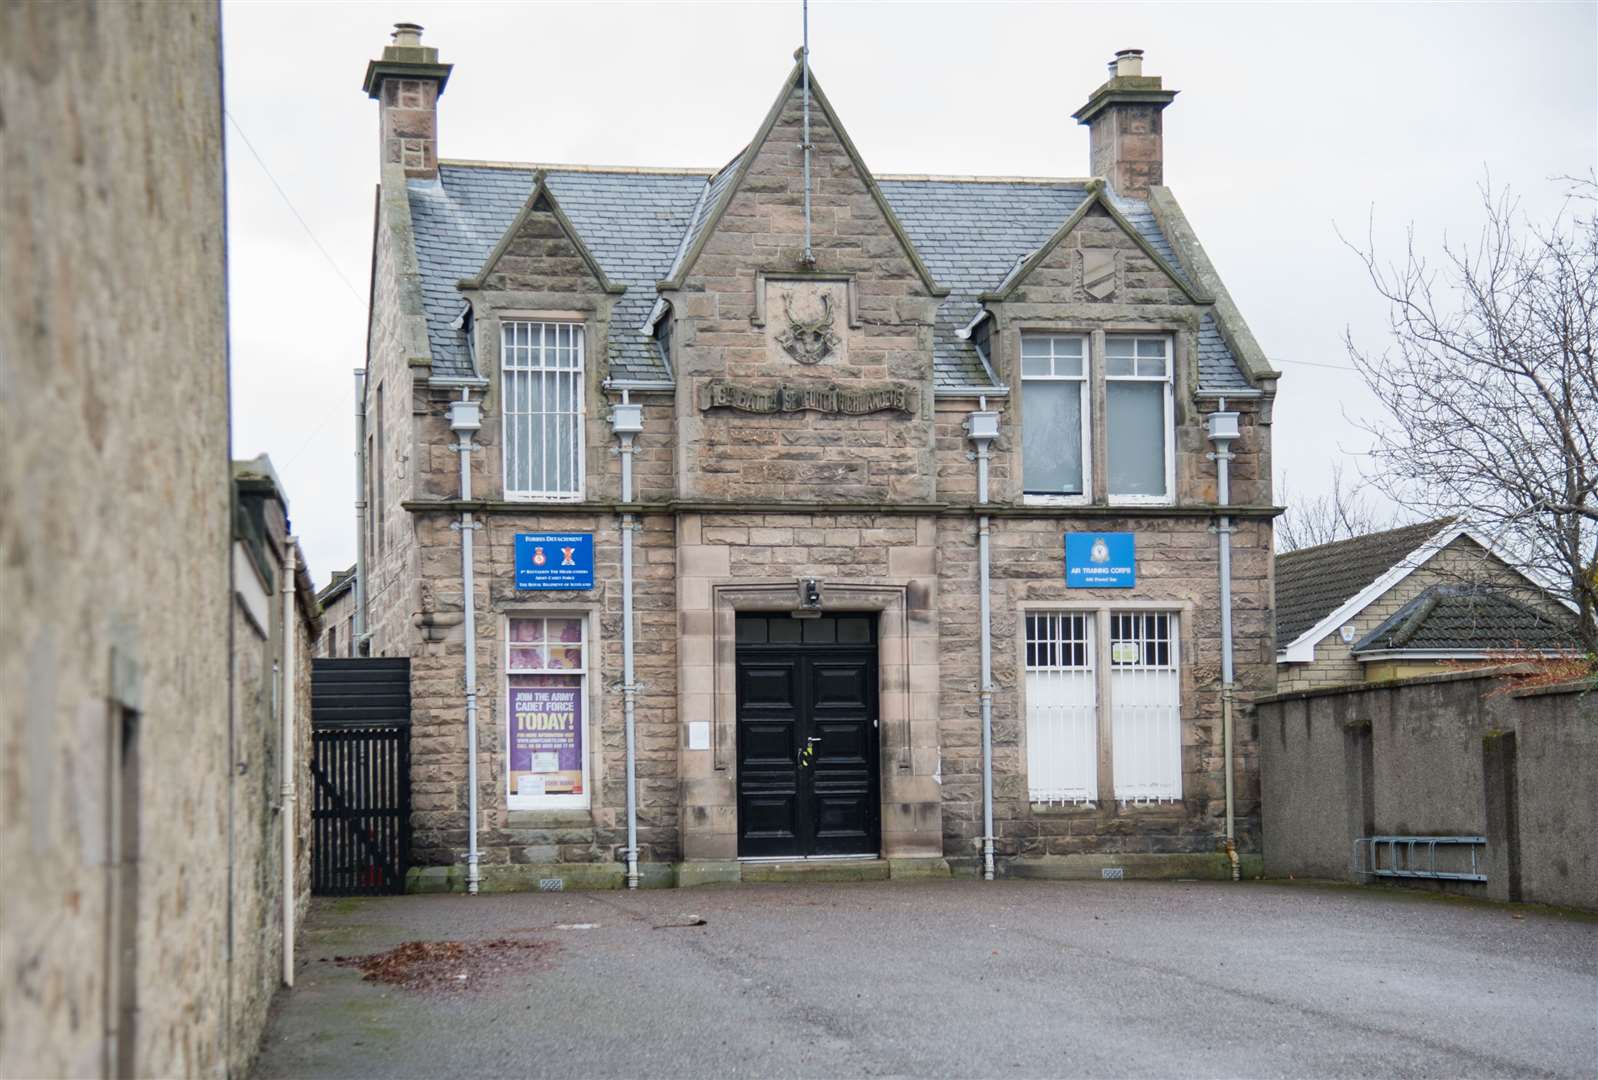 The Forres Cadet headquarters have been refurbished.